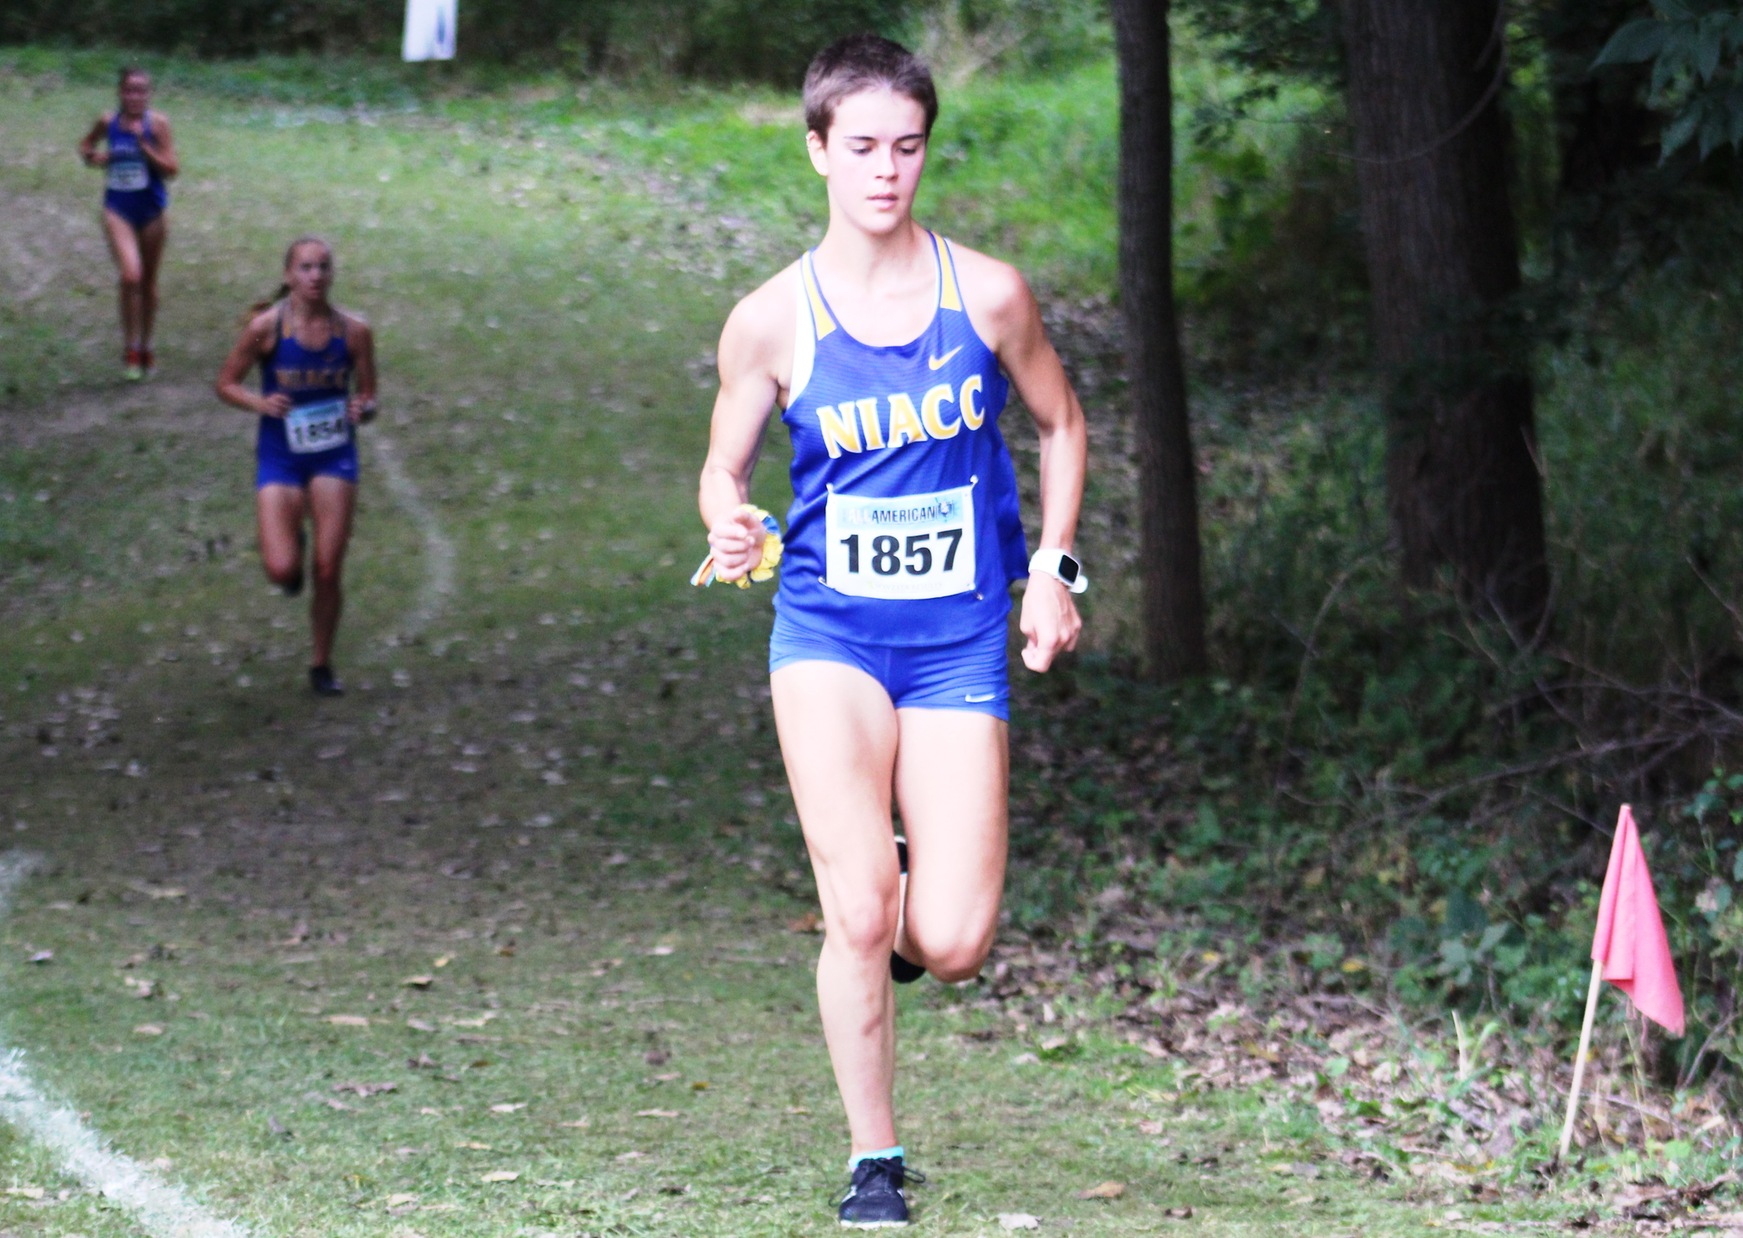 NIACC's Paula Jimenez runs at the Luther College All-American Invitational on Saturday.